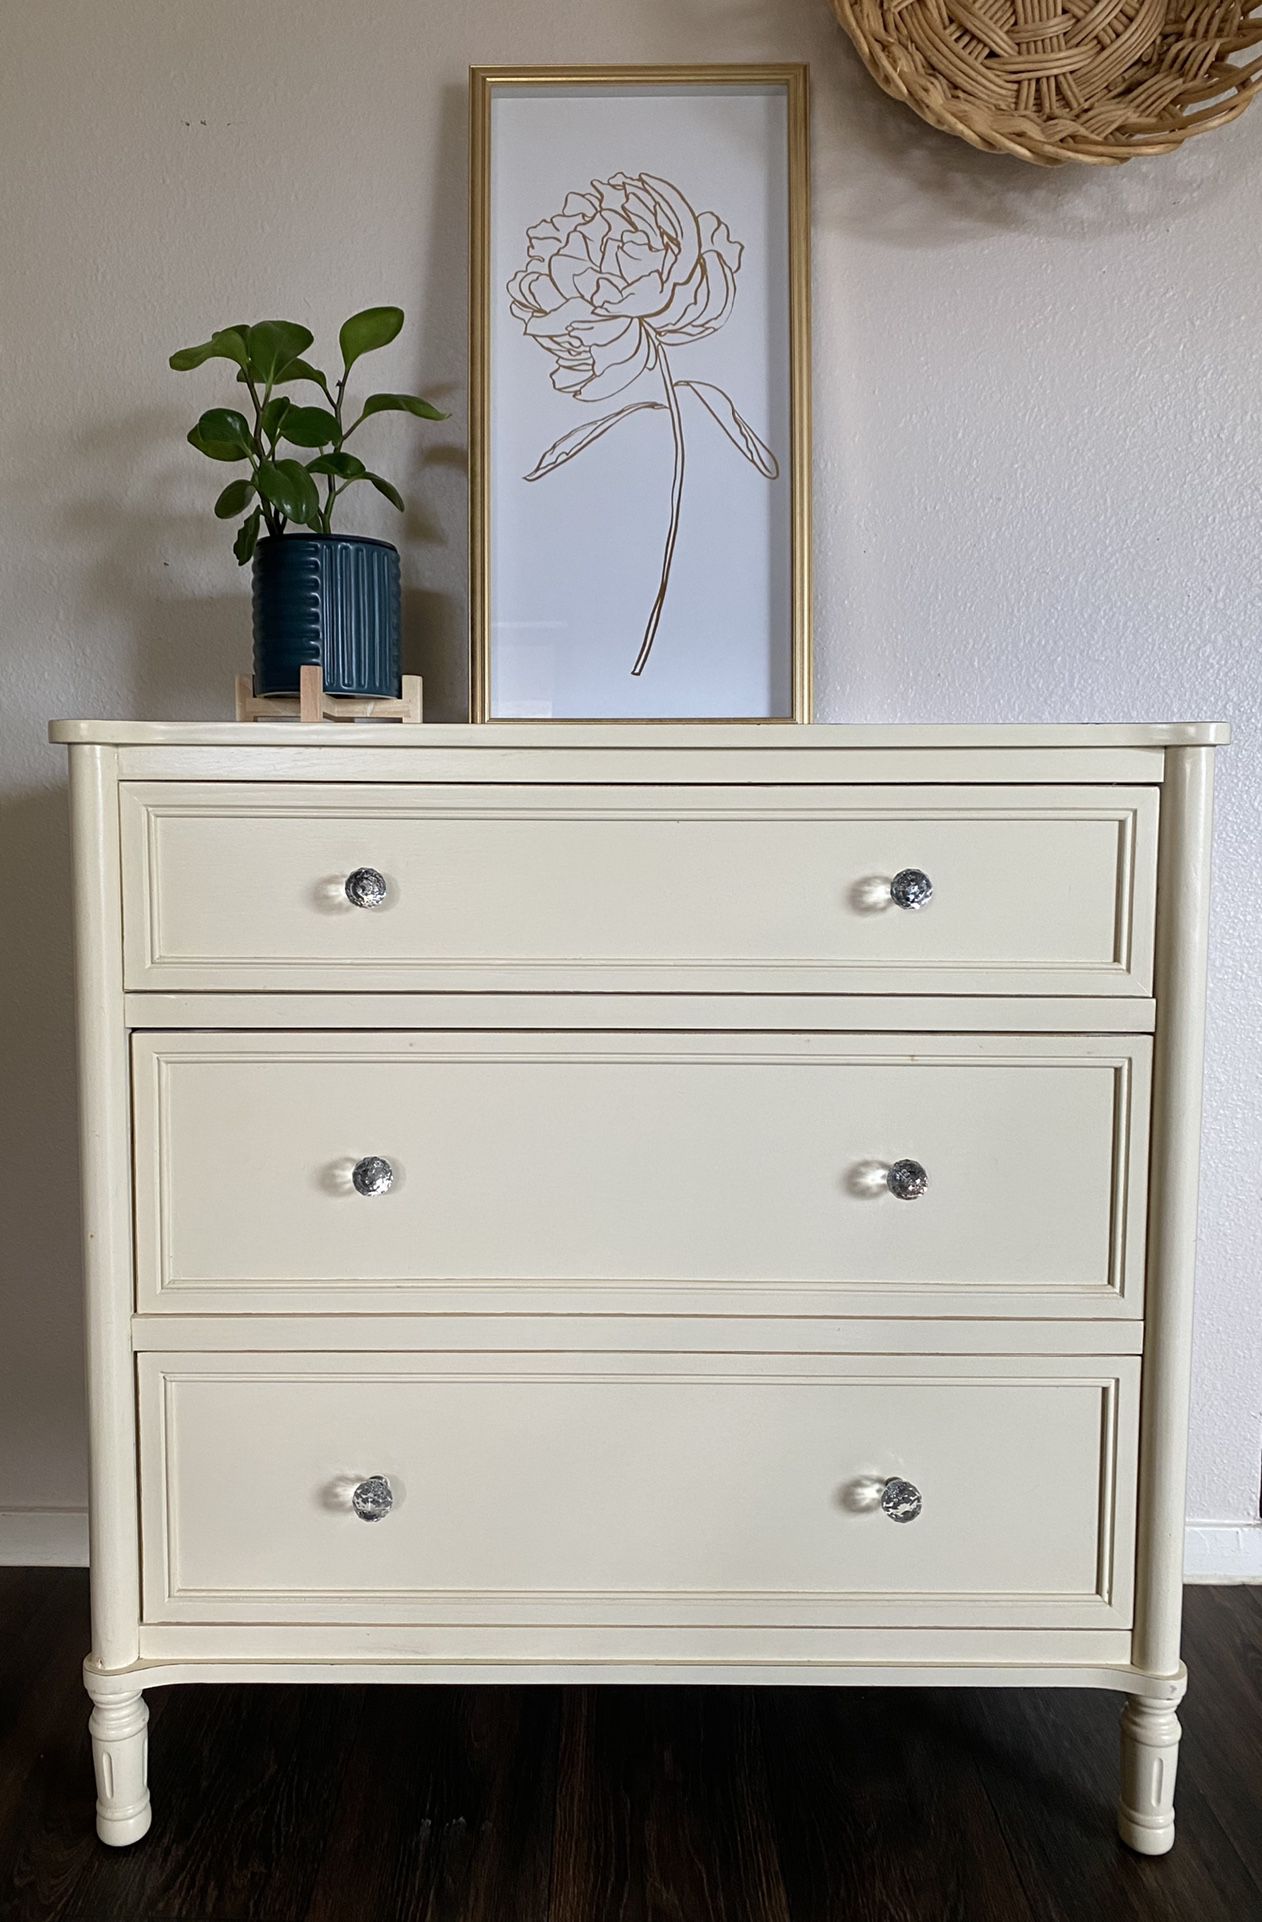 Off White Small Dresser Or Nightstand